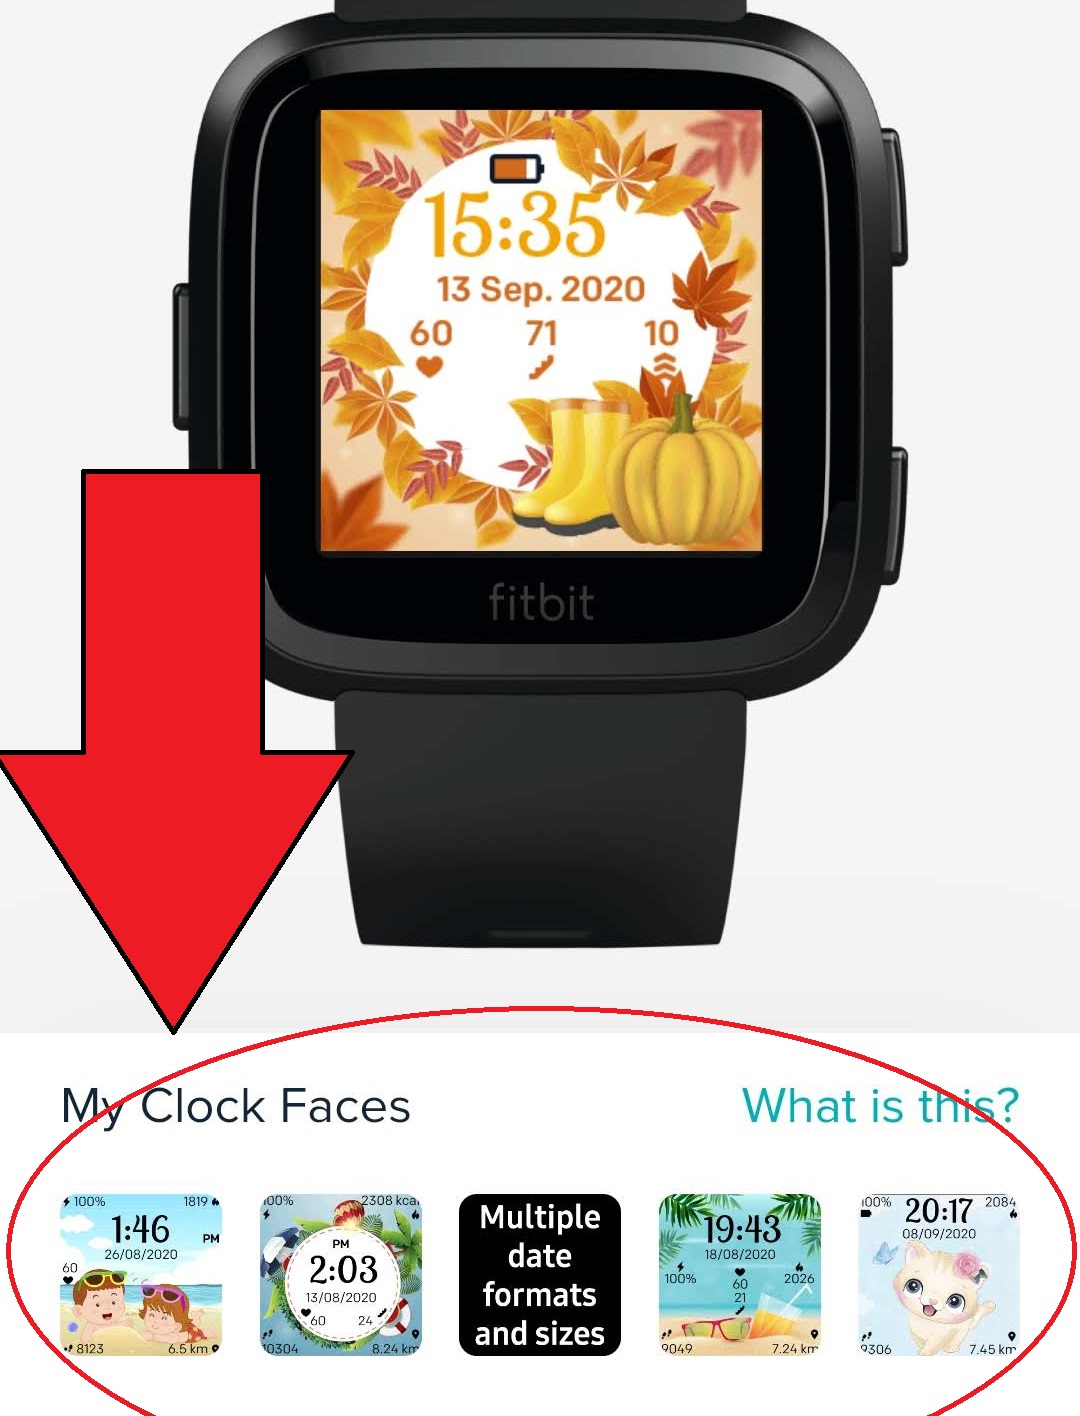 View installed clockfaces on your Fitbit device